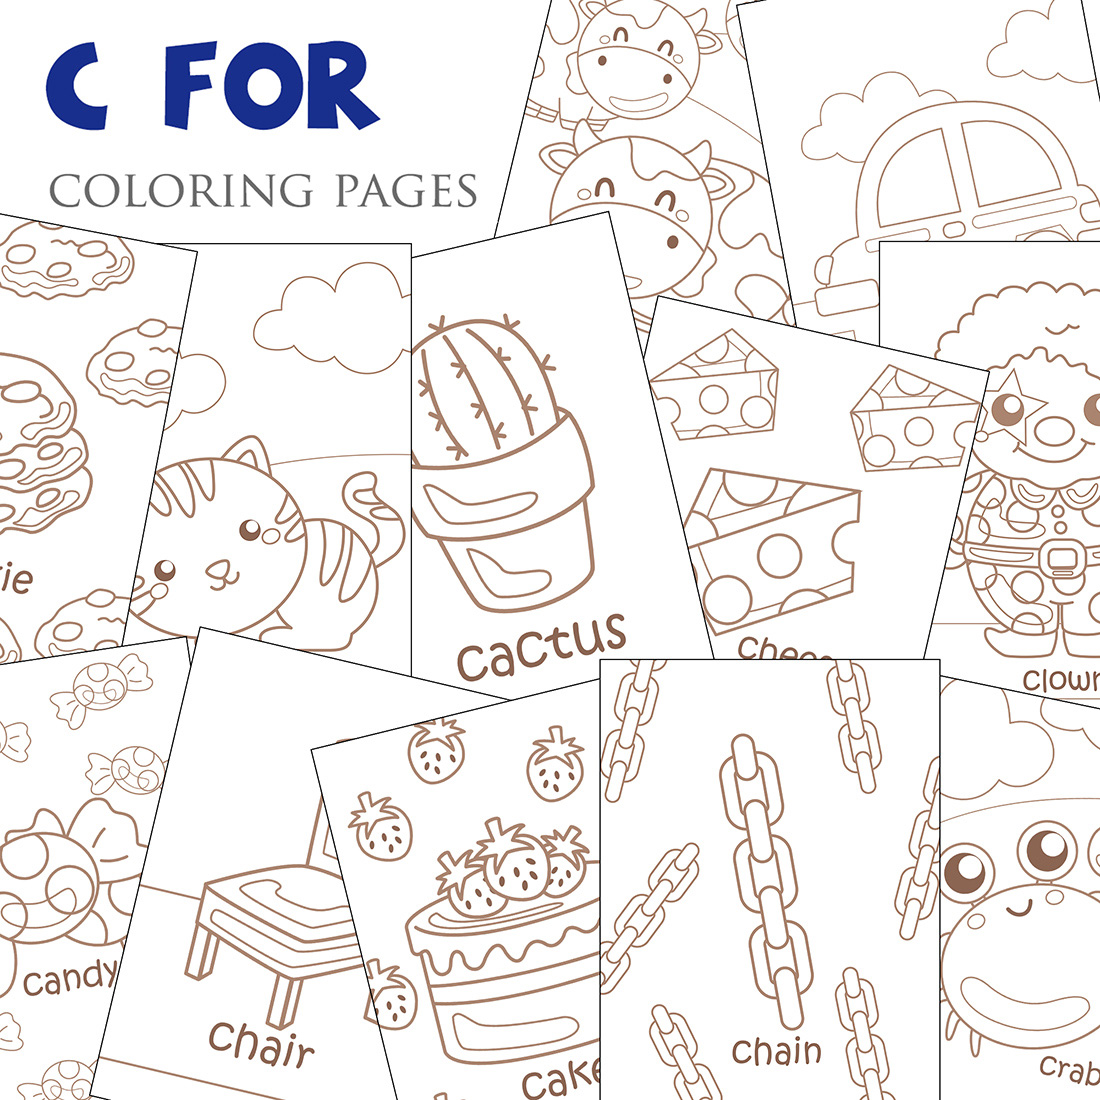 Alphabet C For Vocabulary School Letter Reading Writing Font Study Learning Student Toodler Kids Car Crab Cake Clown Cookie Cow Cactus Cheese Candy Chain Chair Cat Cartoon Coloring Pages for Kids and Adult cover image.